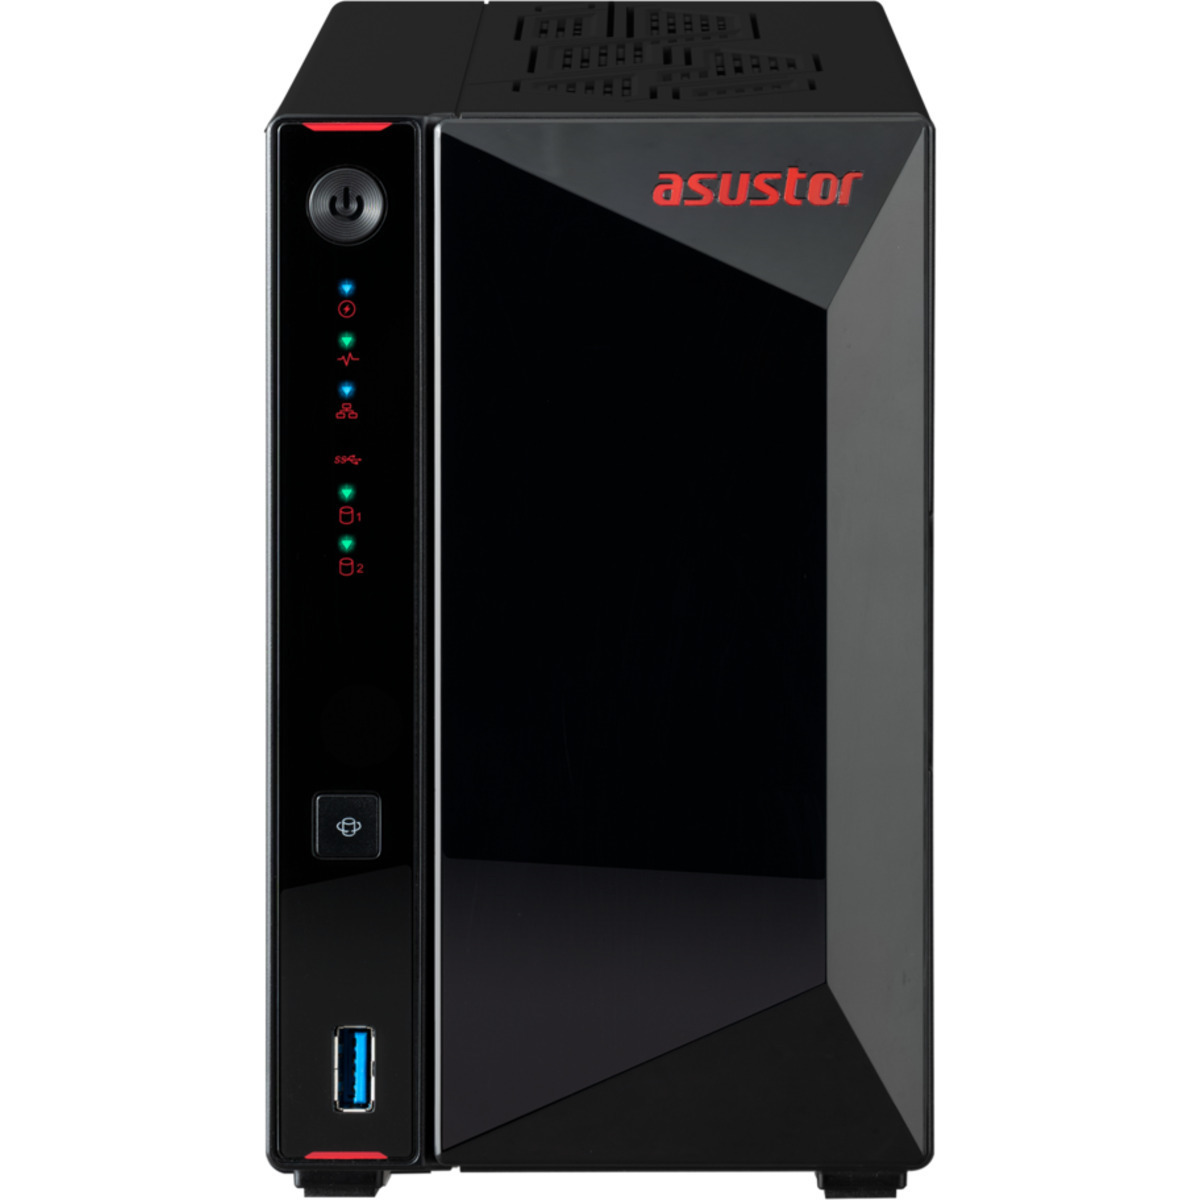 buy ASUSTOR Nimbustor 2 Gen2 AS5402T 12tb Desktop NAS - Network Attached Storage Device 2x6000gb Western Digital Red WD60EFAX 3.5 5400rpm SATA 6Gb/s HDD NAS Class Drives Installed - Burn-In Tested - ON SALE - FREE RAM UPGRADE - nas headquarters buy network attached storage server device das new raid-5 free shipping simply usa Nimbustor 2 Gen2 AS5402T